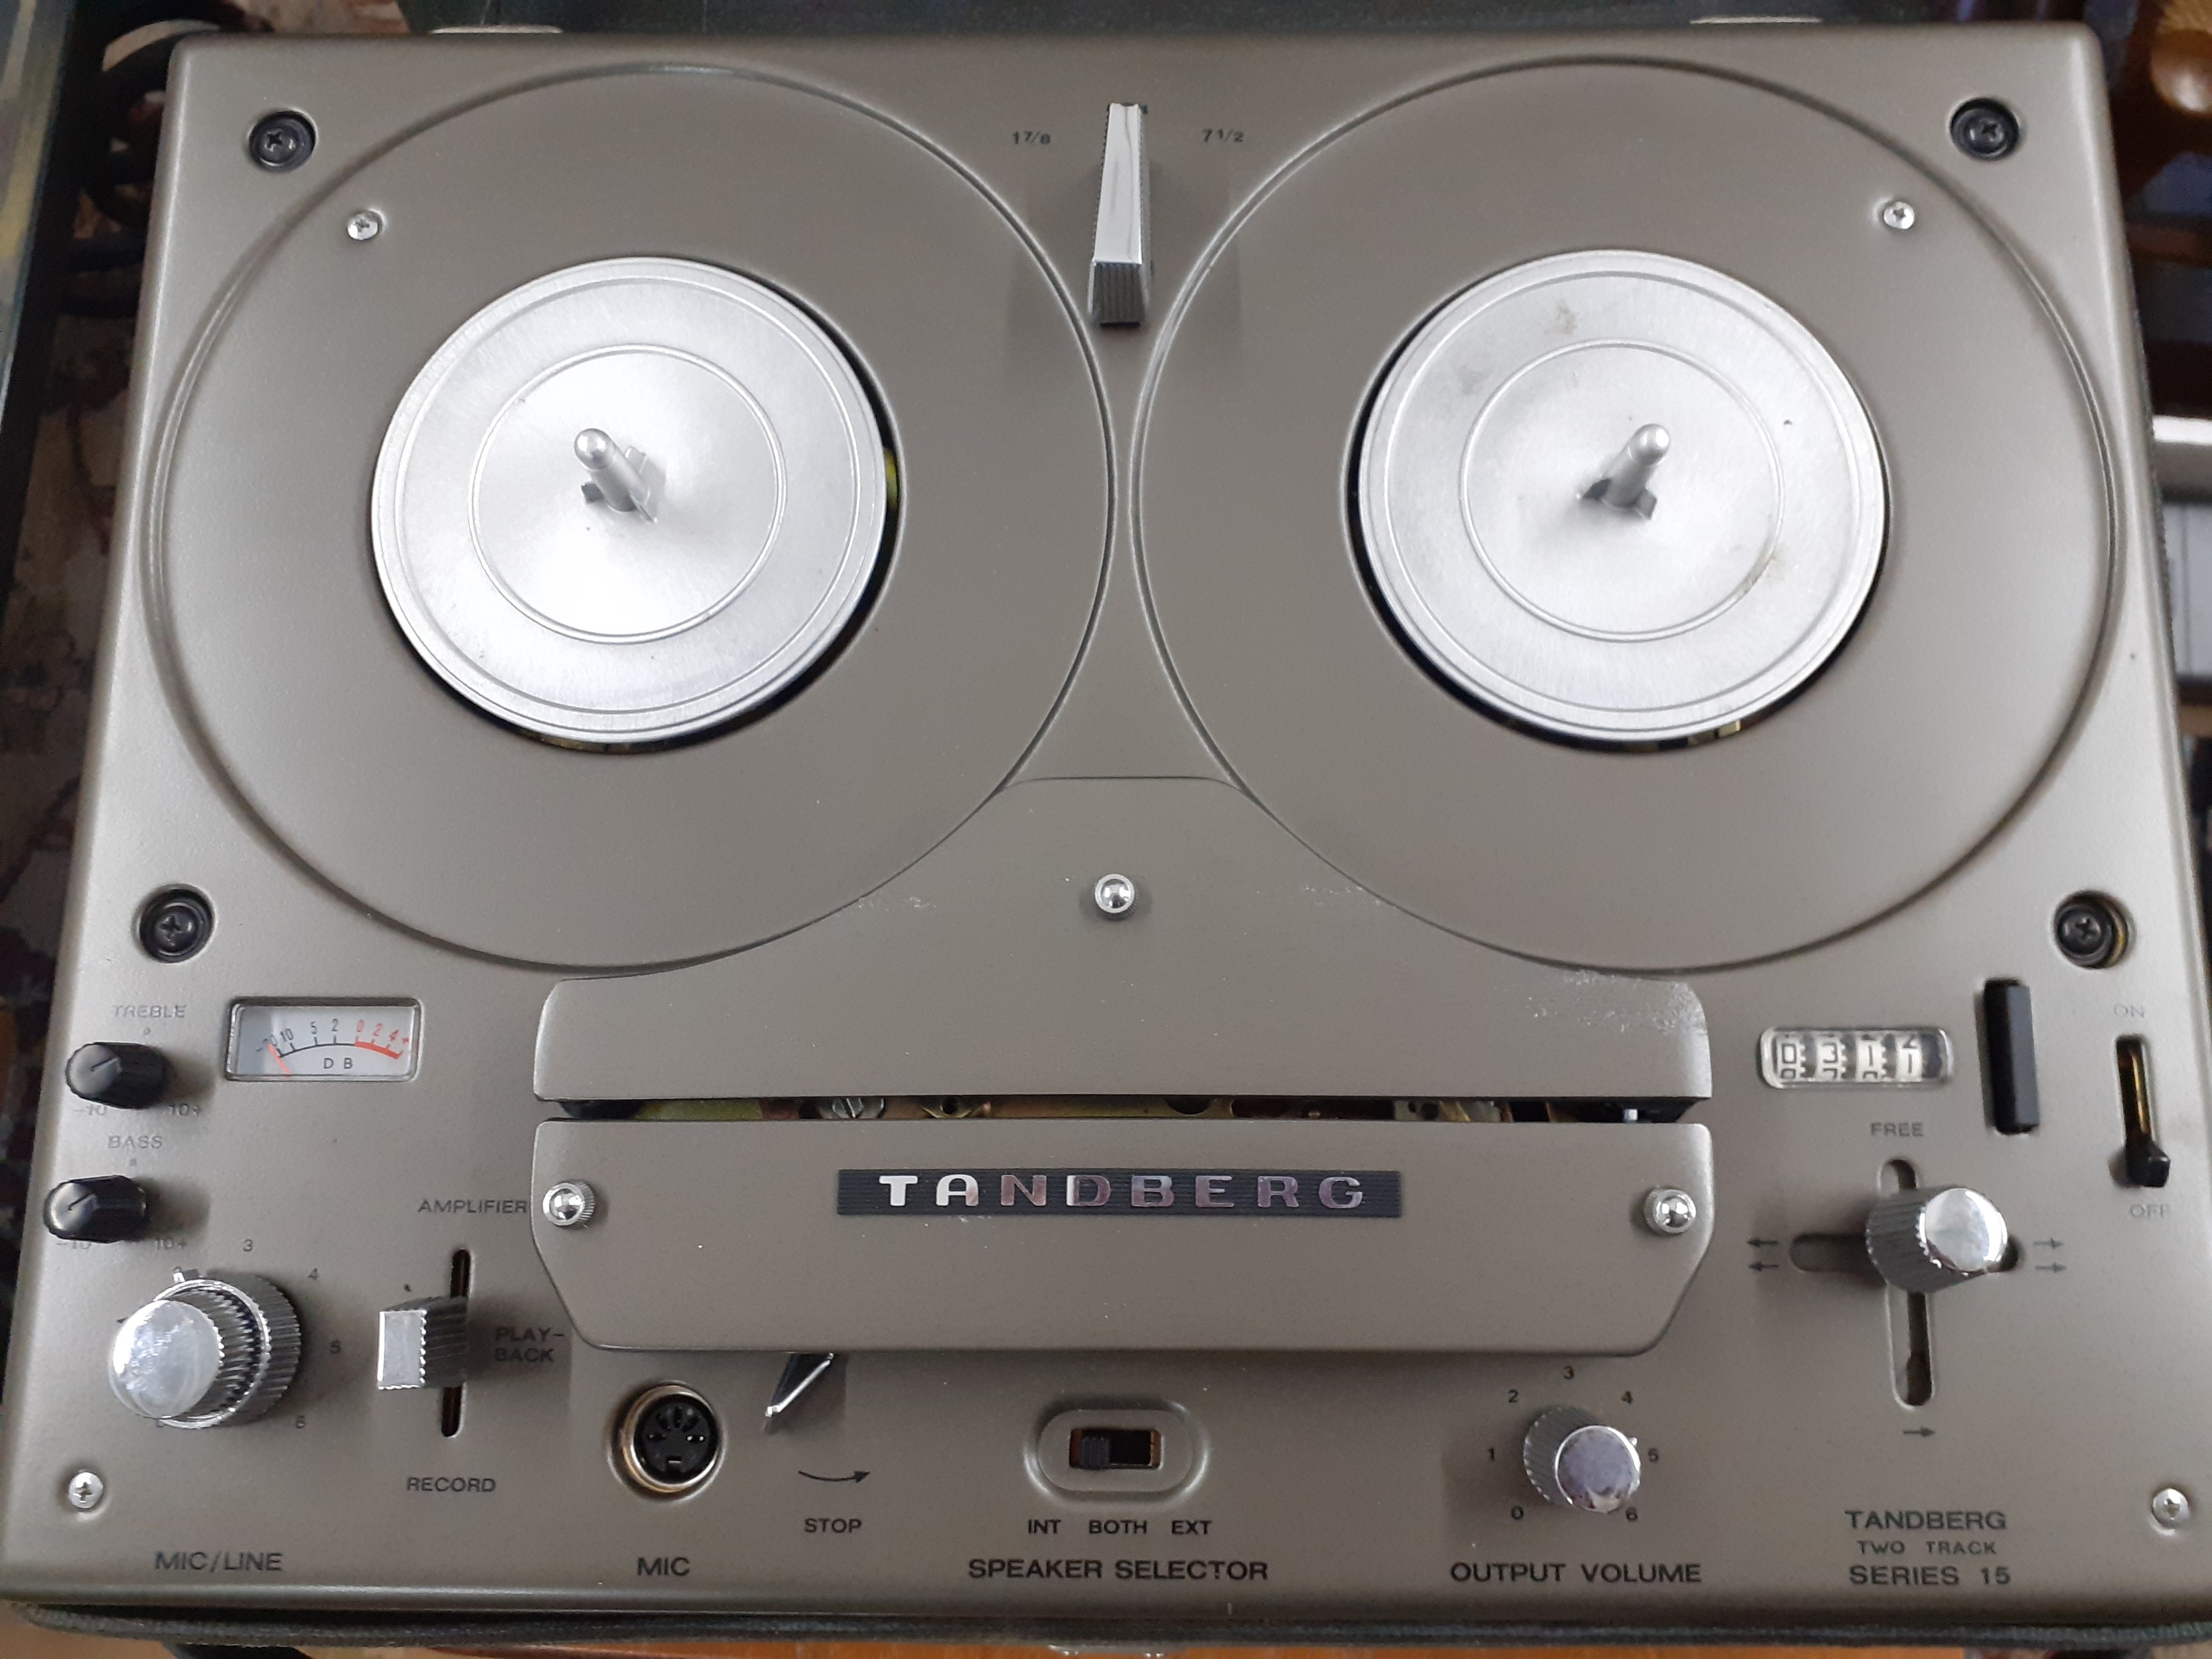 A vintage Tandberg Series 15 reel to reel tape recorder with